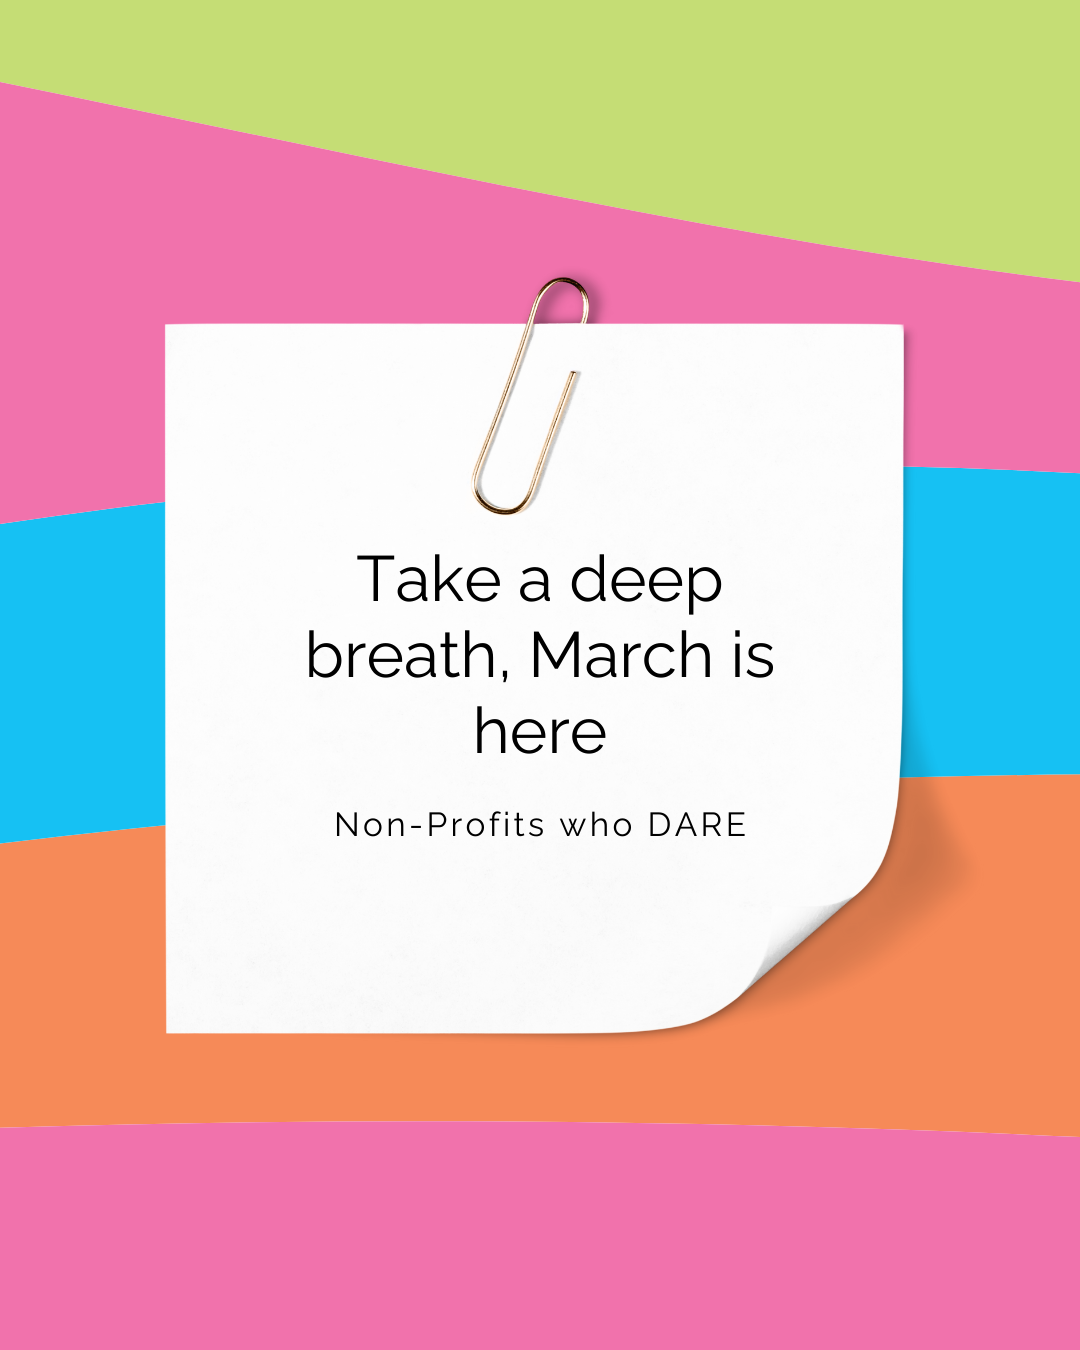 Take a deep breath. March is here.